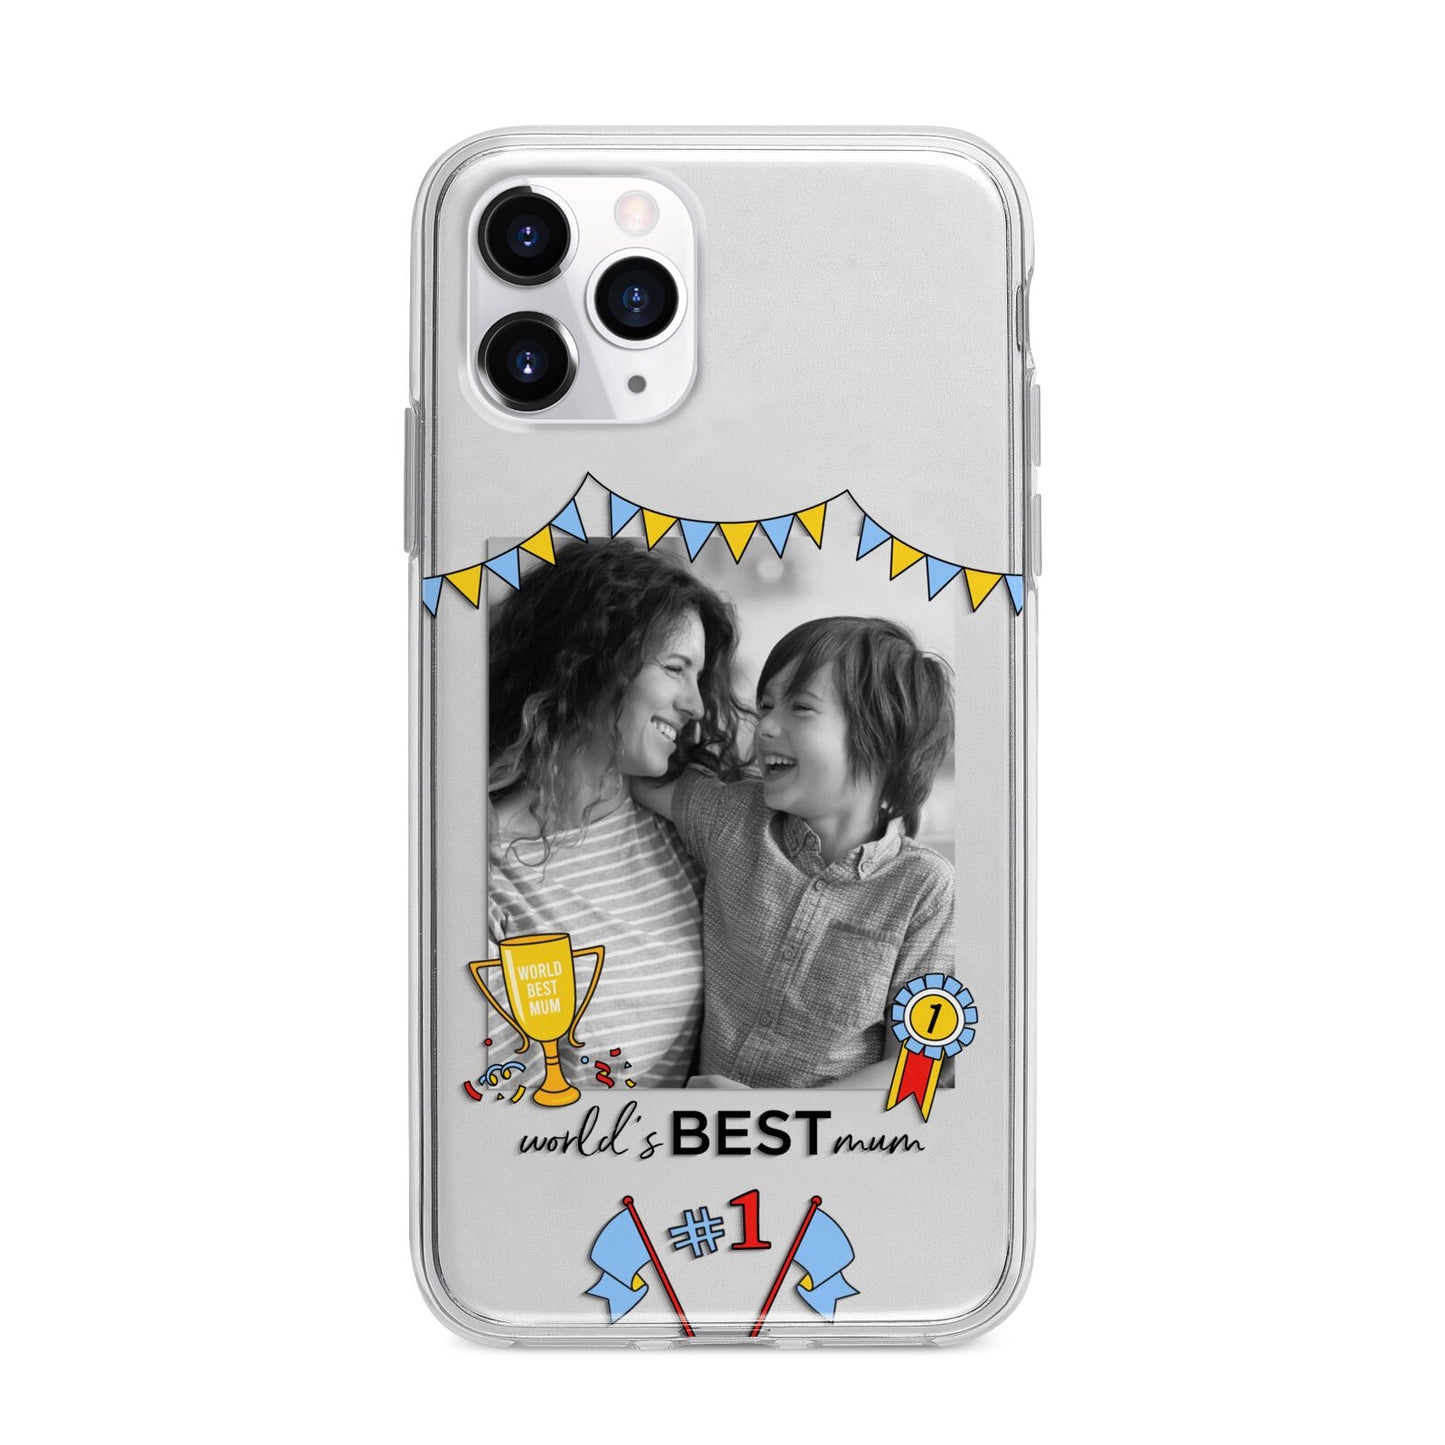 Worlds Best Mum Apple iPhone 11 Pro in Silver with Bumper Case